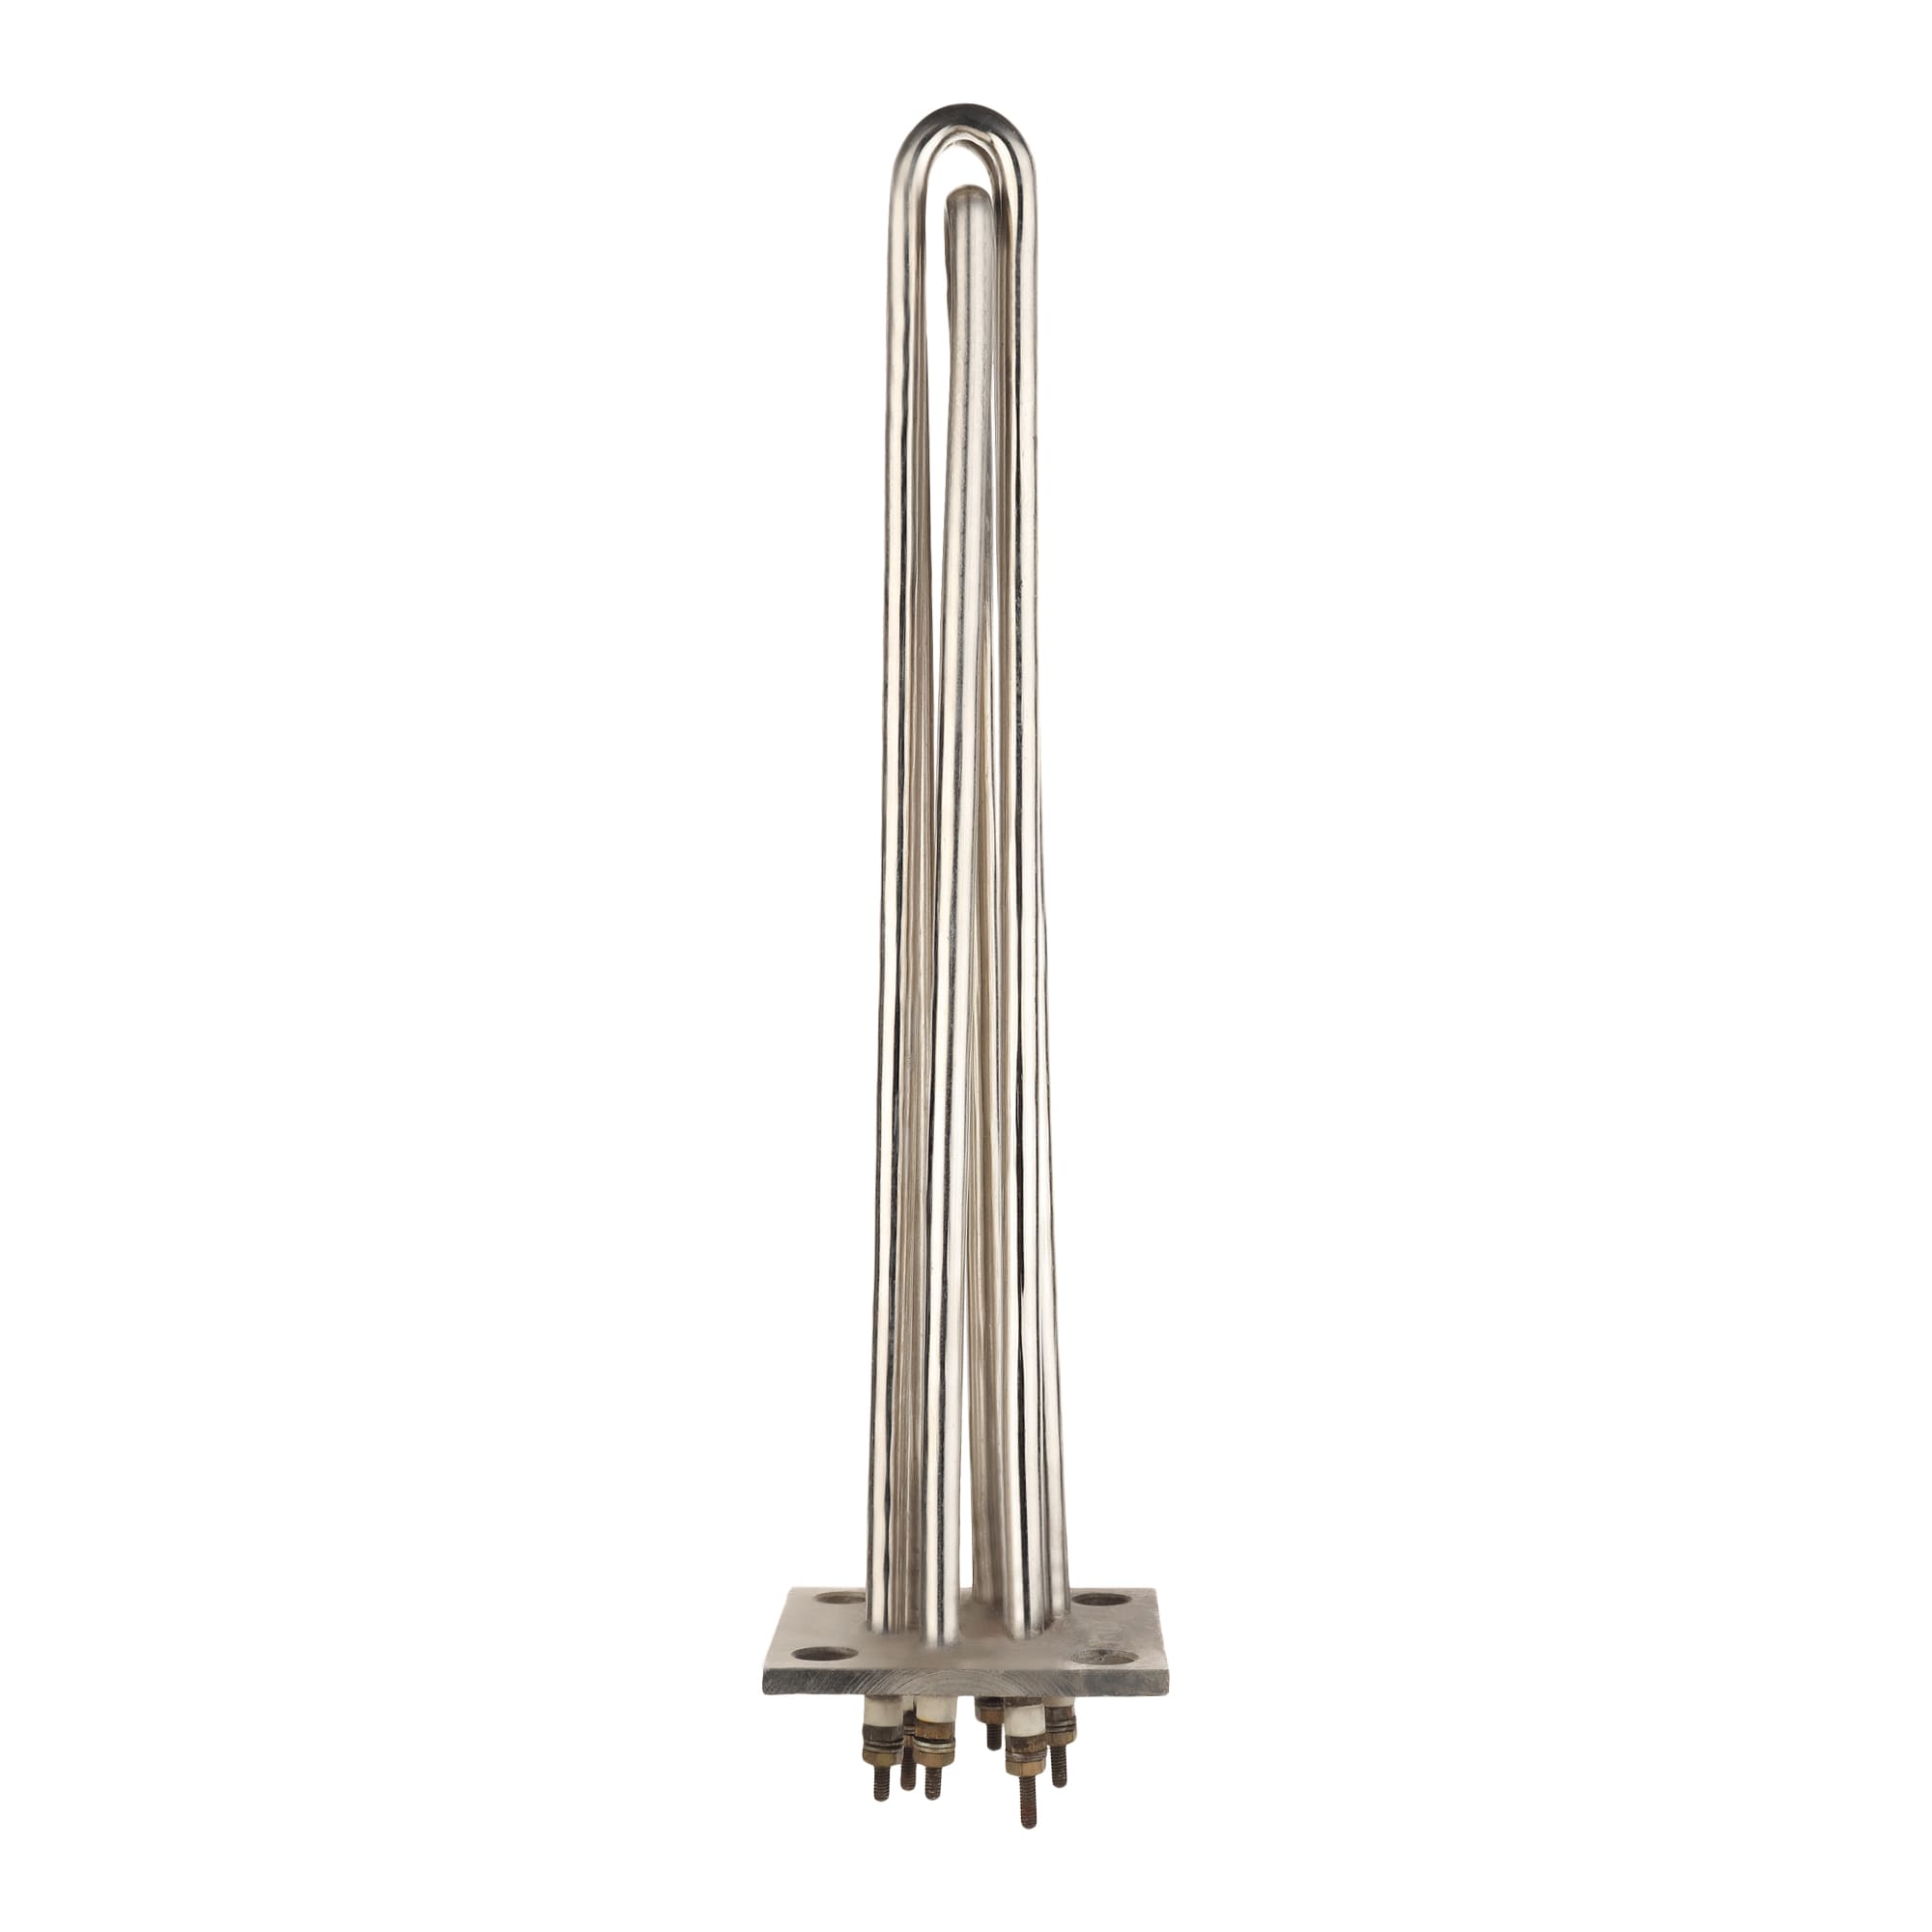 Flange Type Immersion Heater